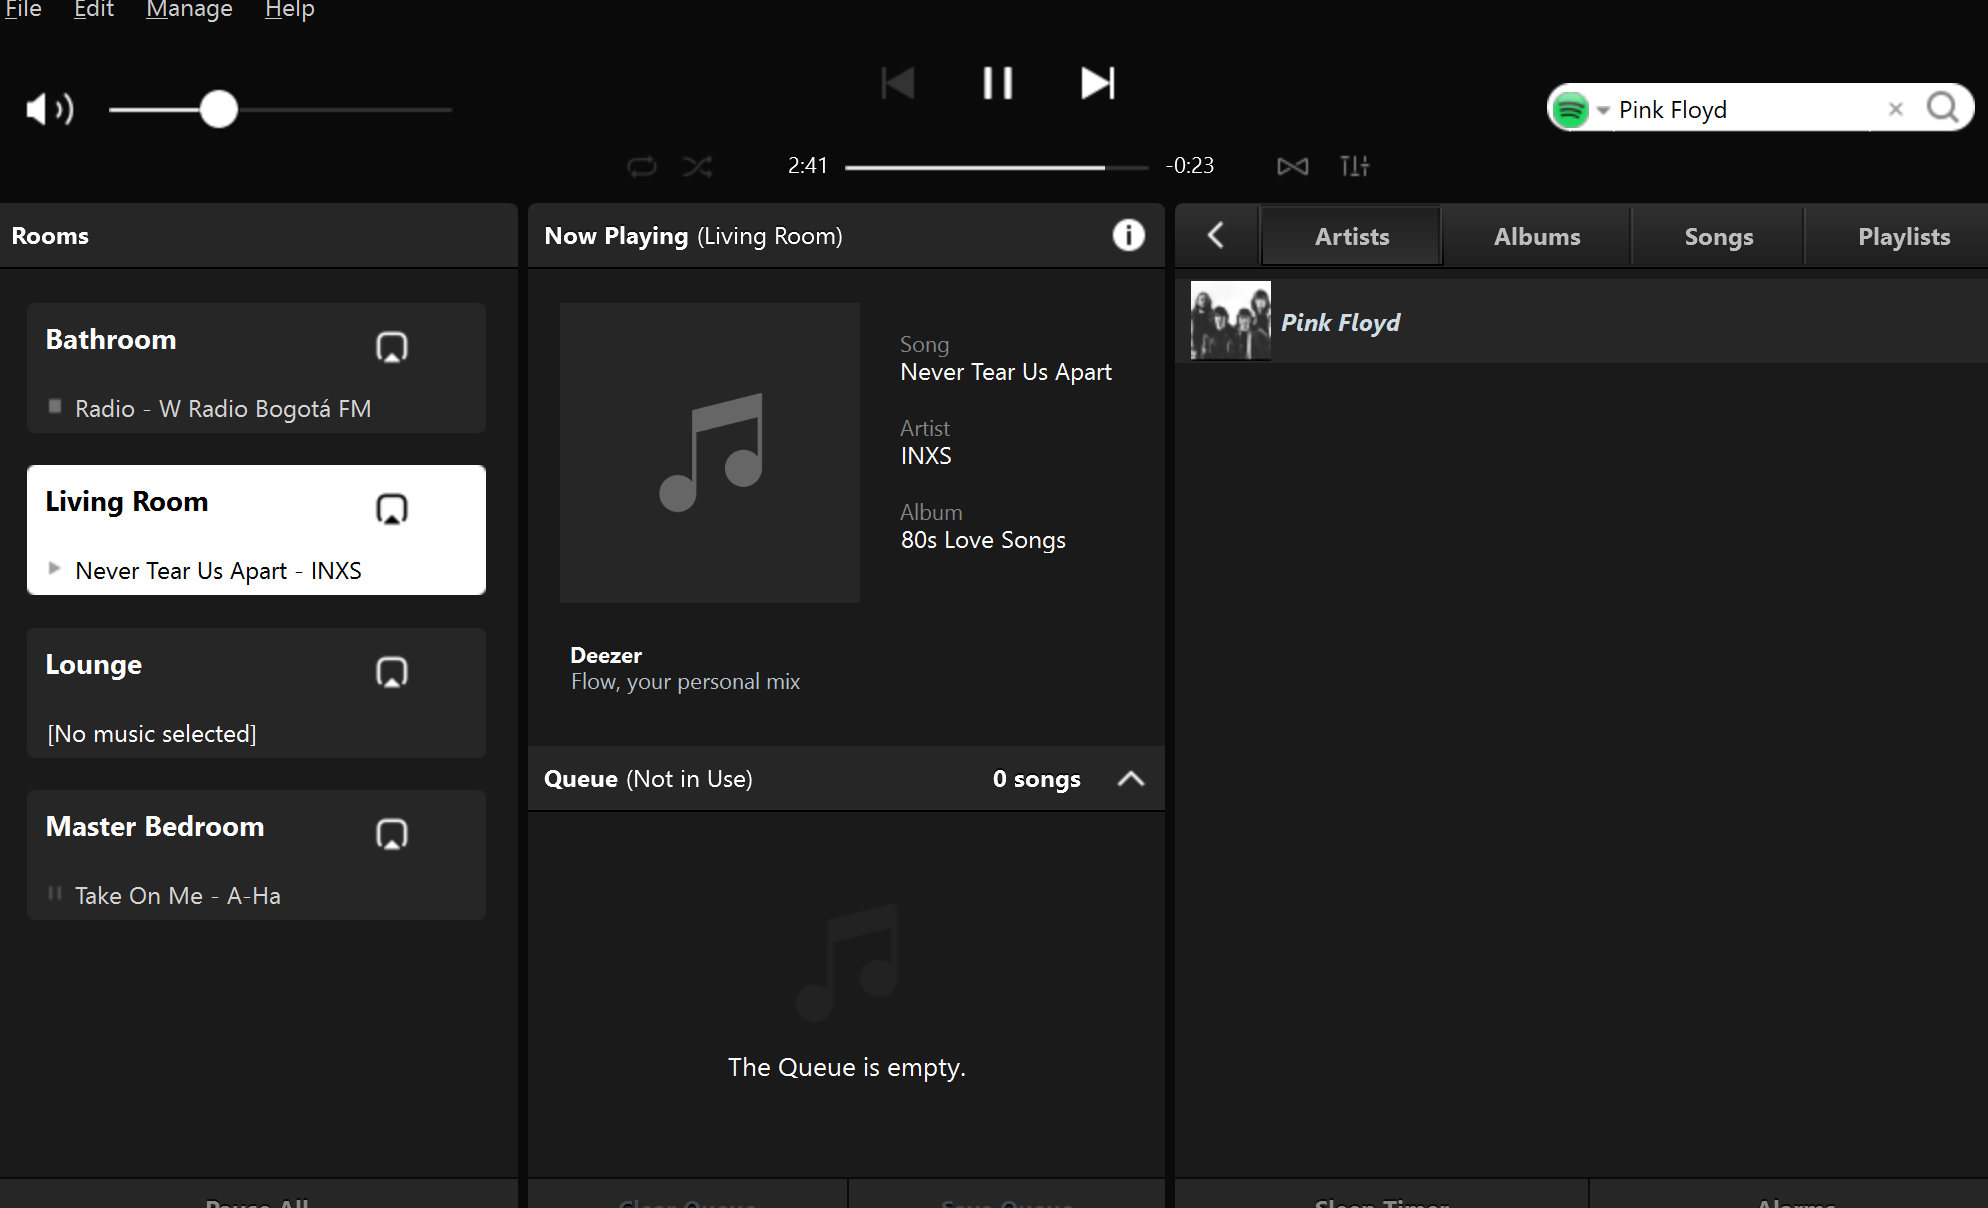 trouble searching songs deezer through the sonos S1 app | Sonos Community